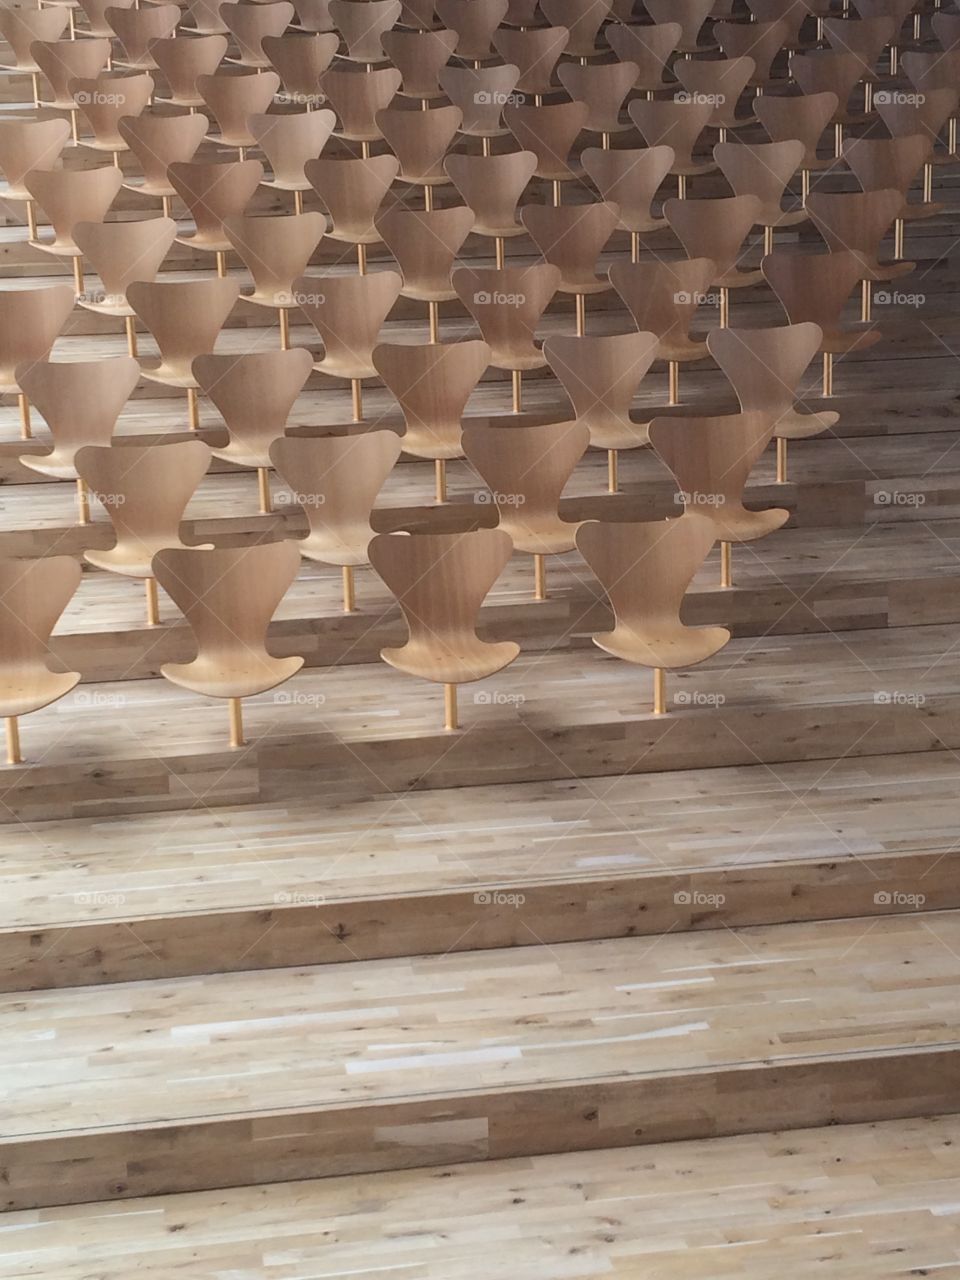 Chairs in a pattern. Maritime museum in Elsinore Denmark. 